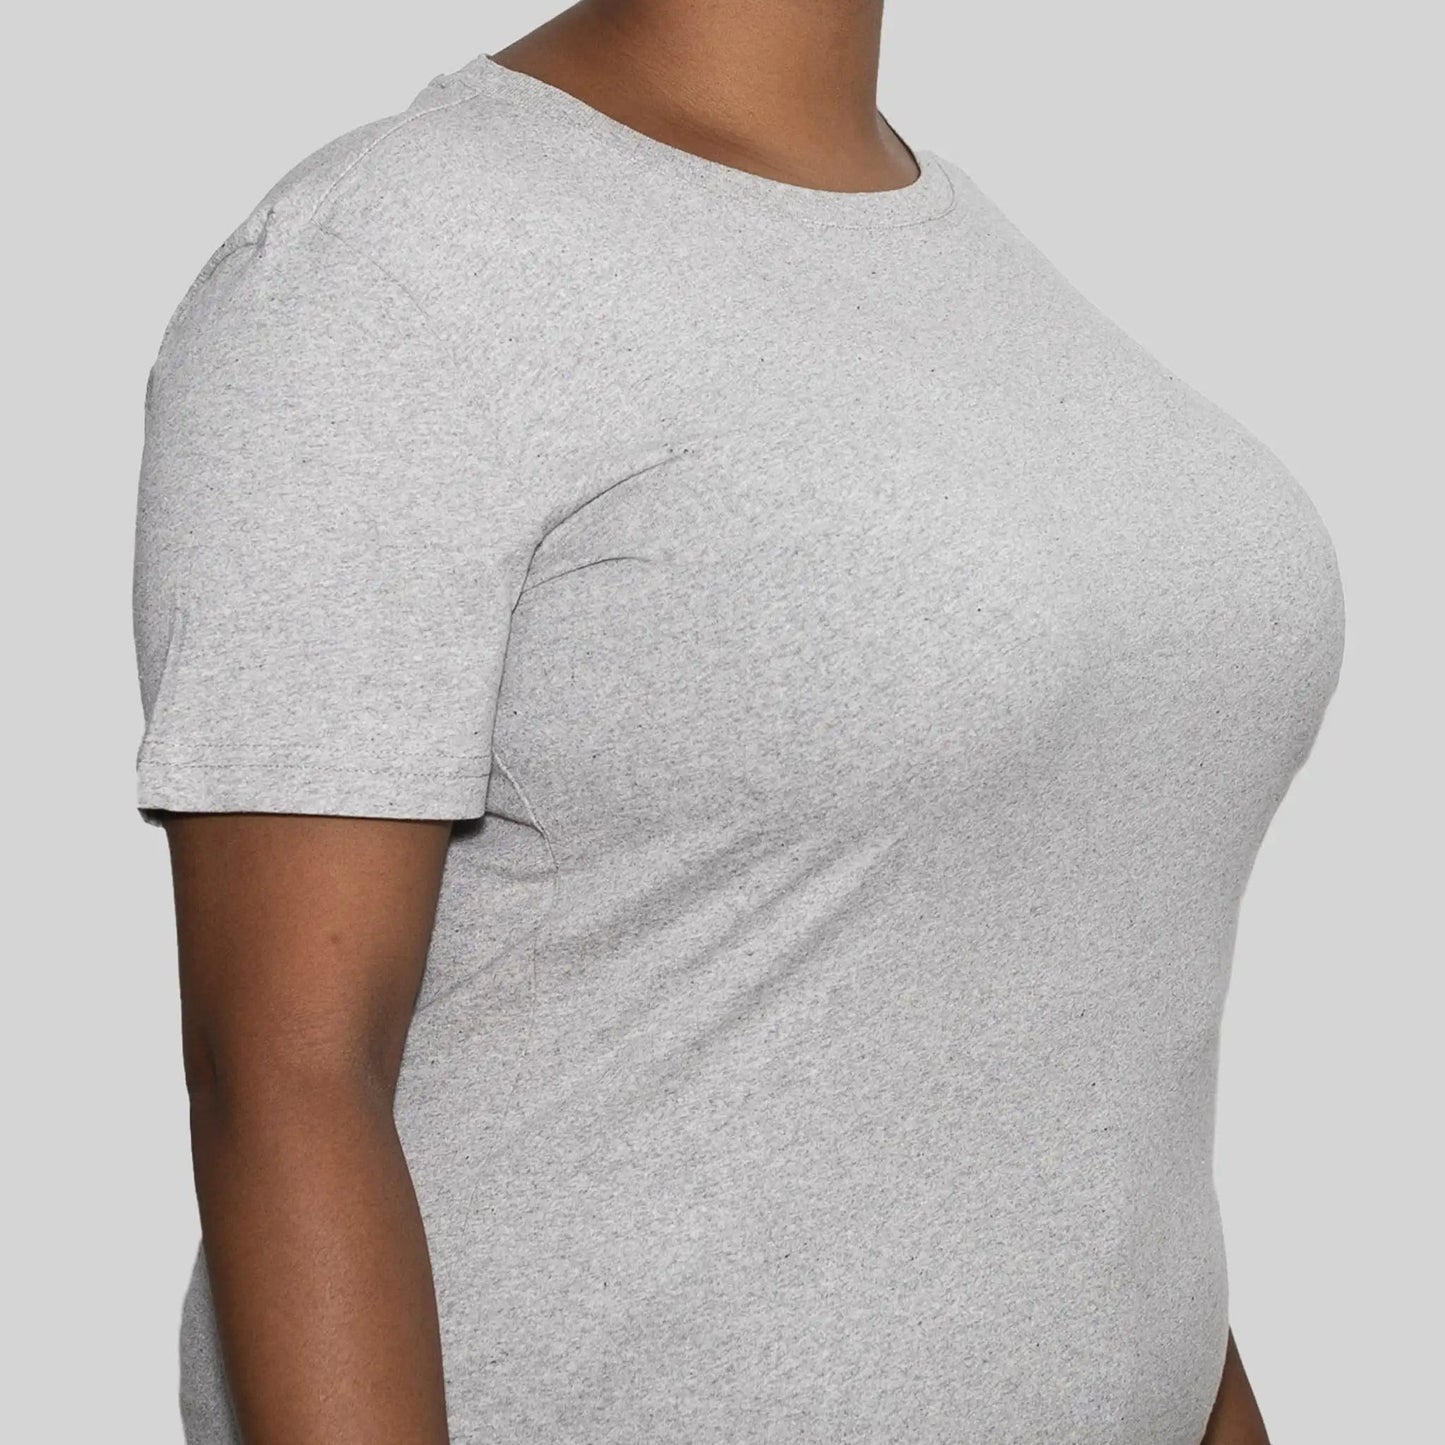 Women’s Recycled Cotton T-Shirt, Heather Grey